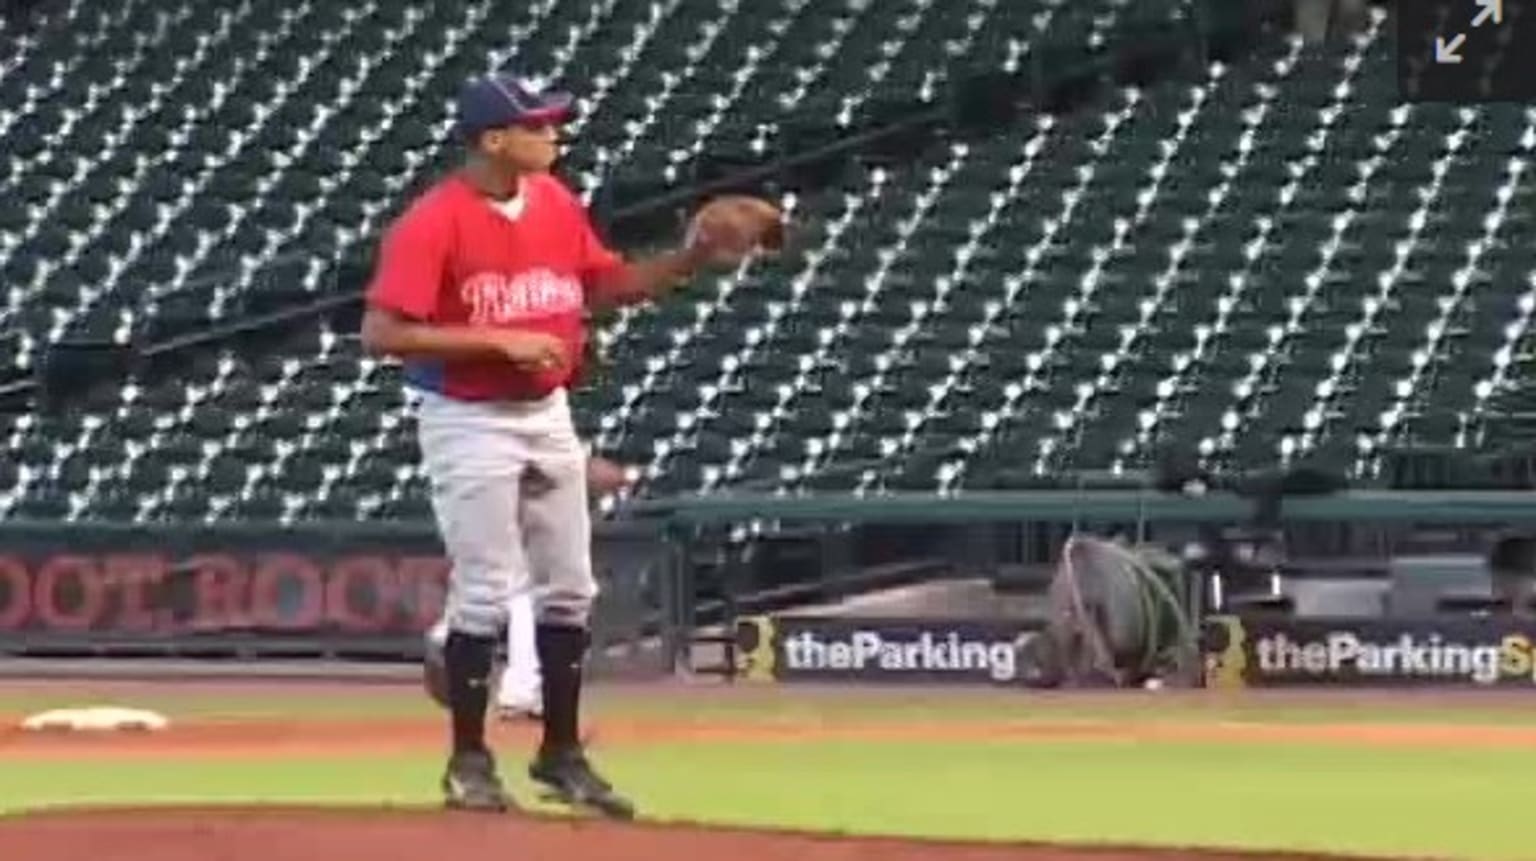 Patrick Mahomes stands on a pitching mound wearing a Phillies uniform